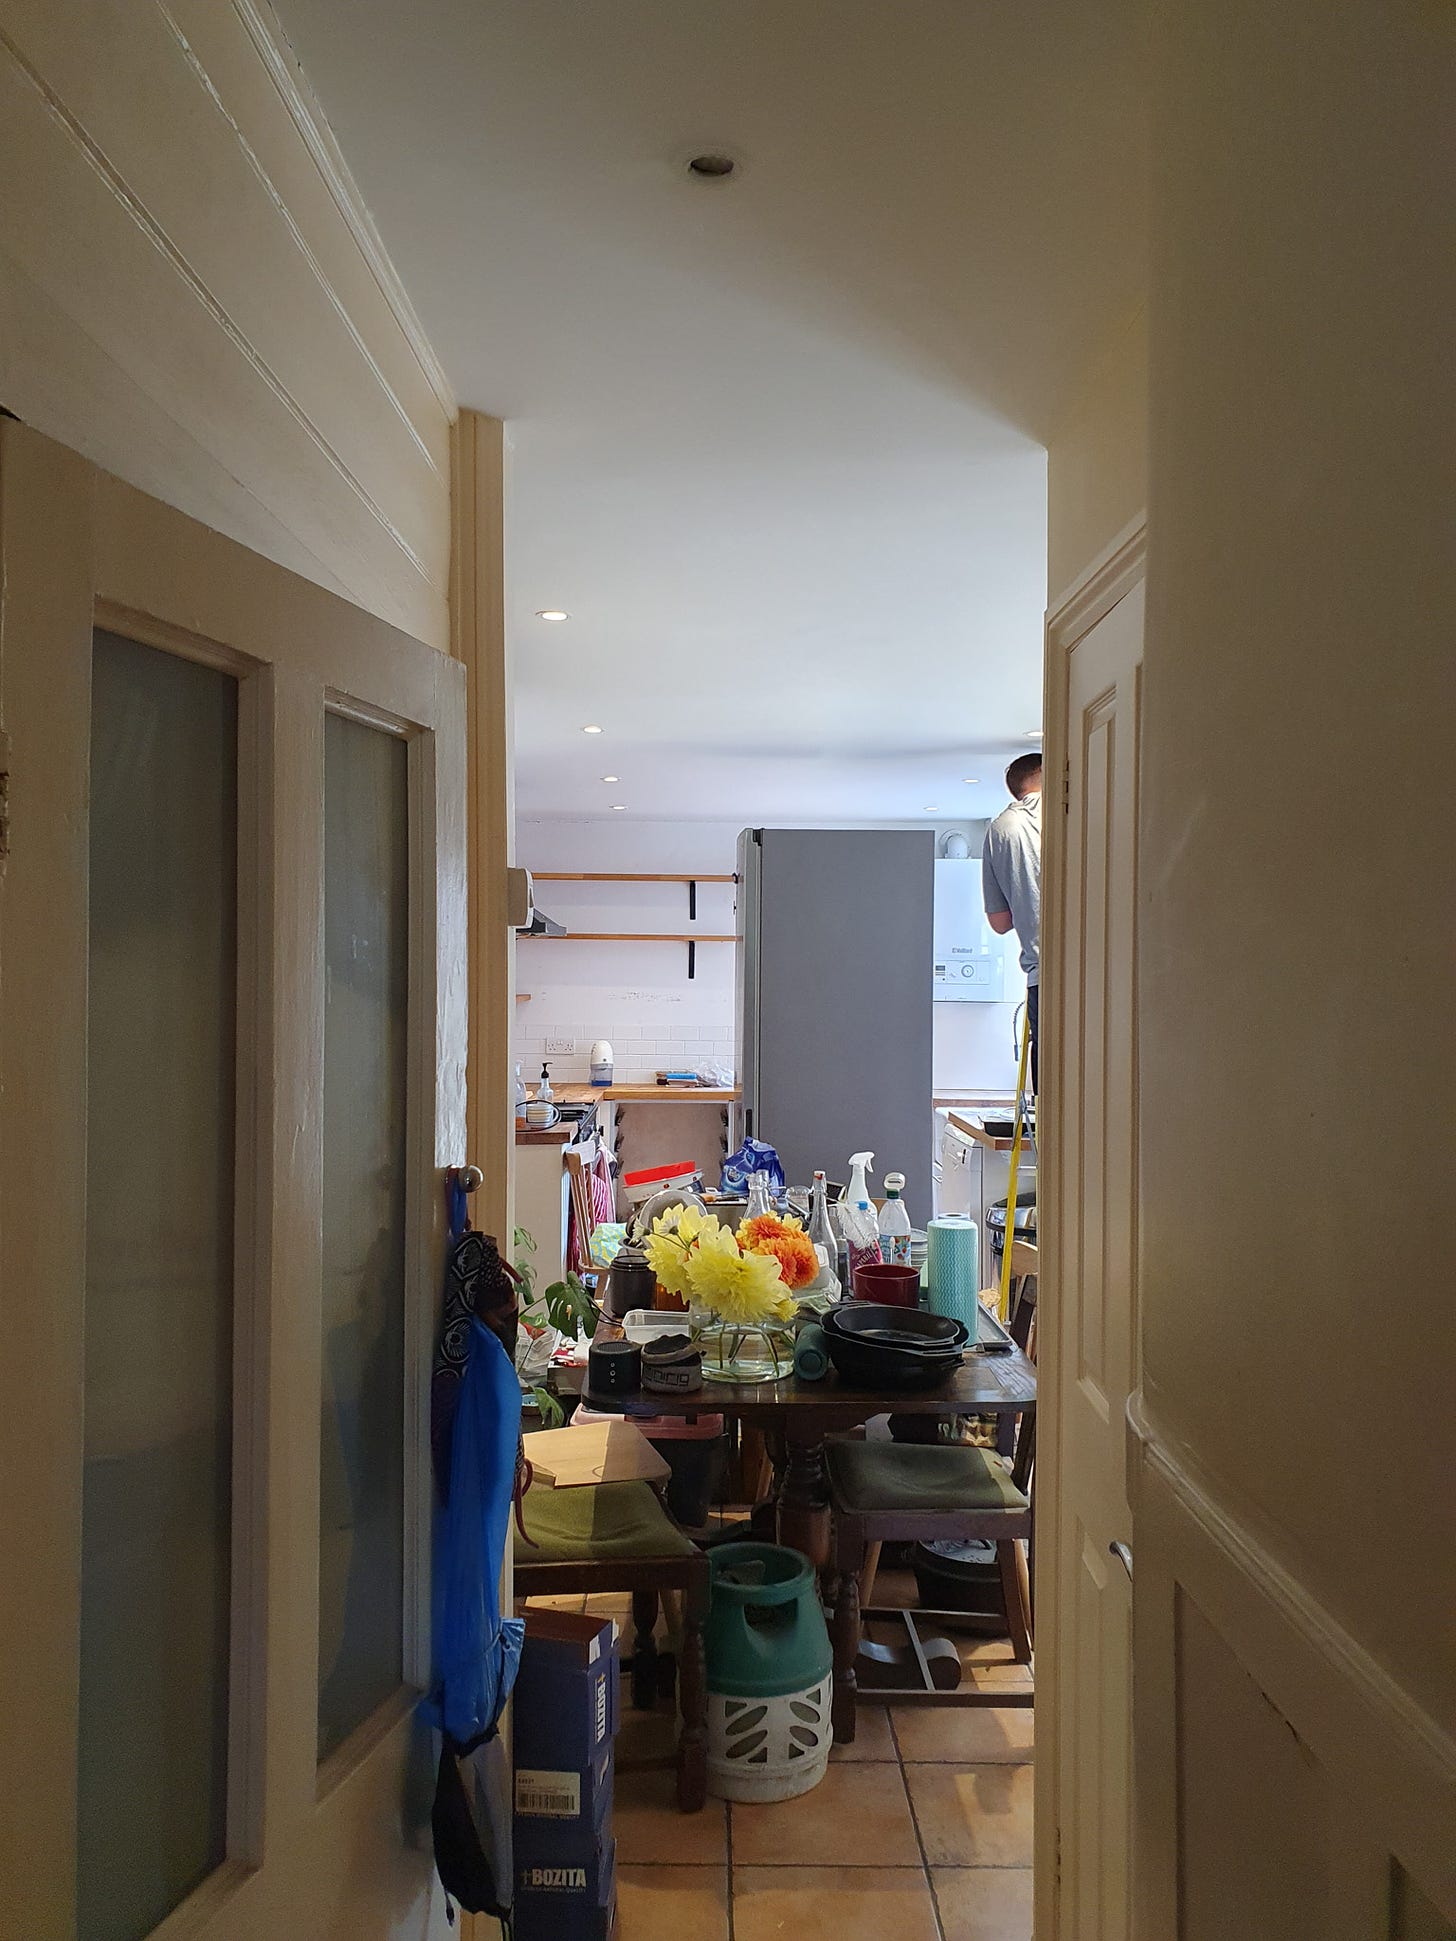 Photo of kitchen covered in mess